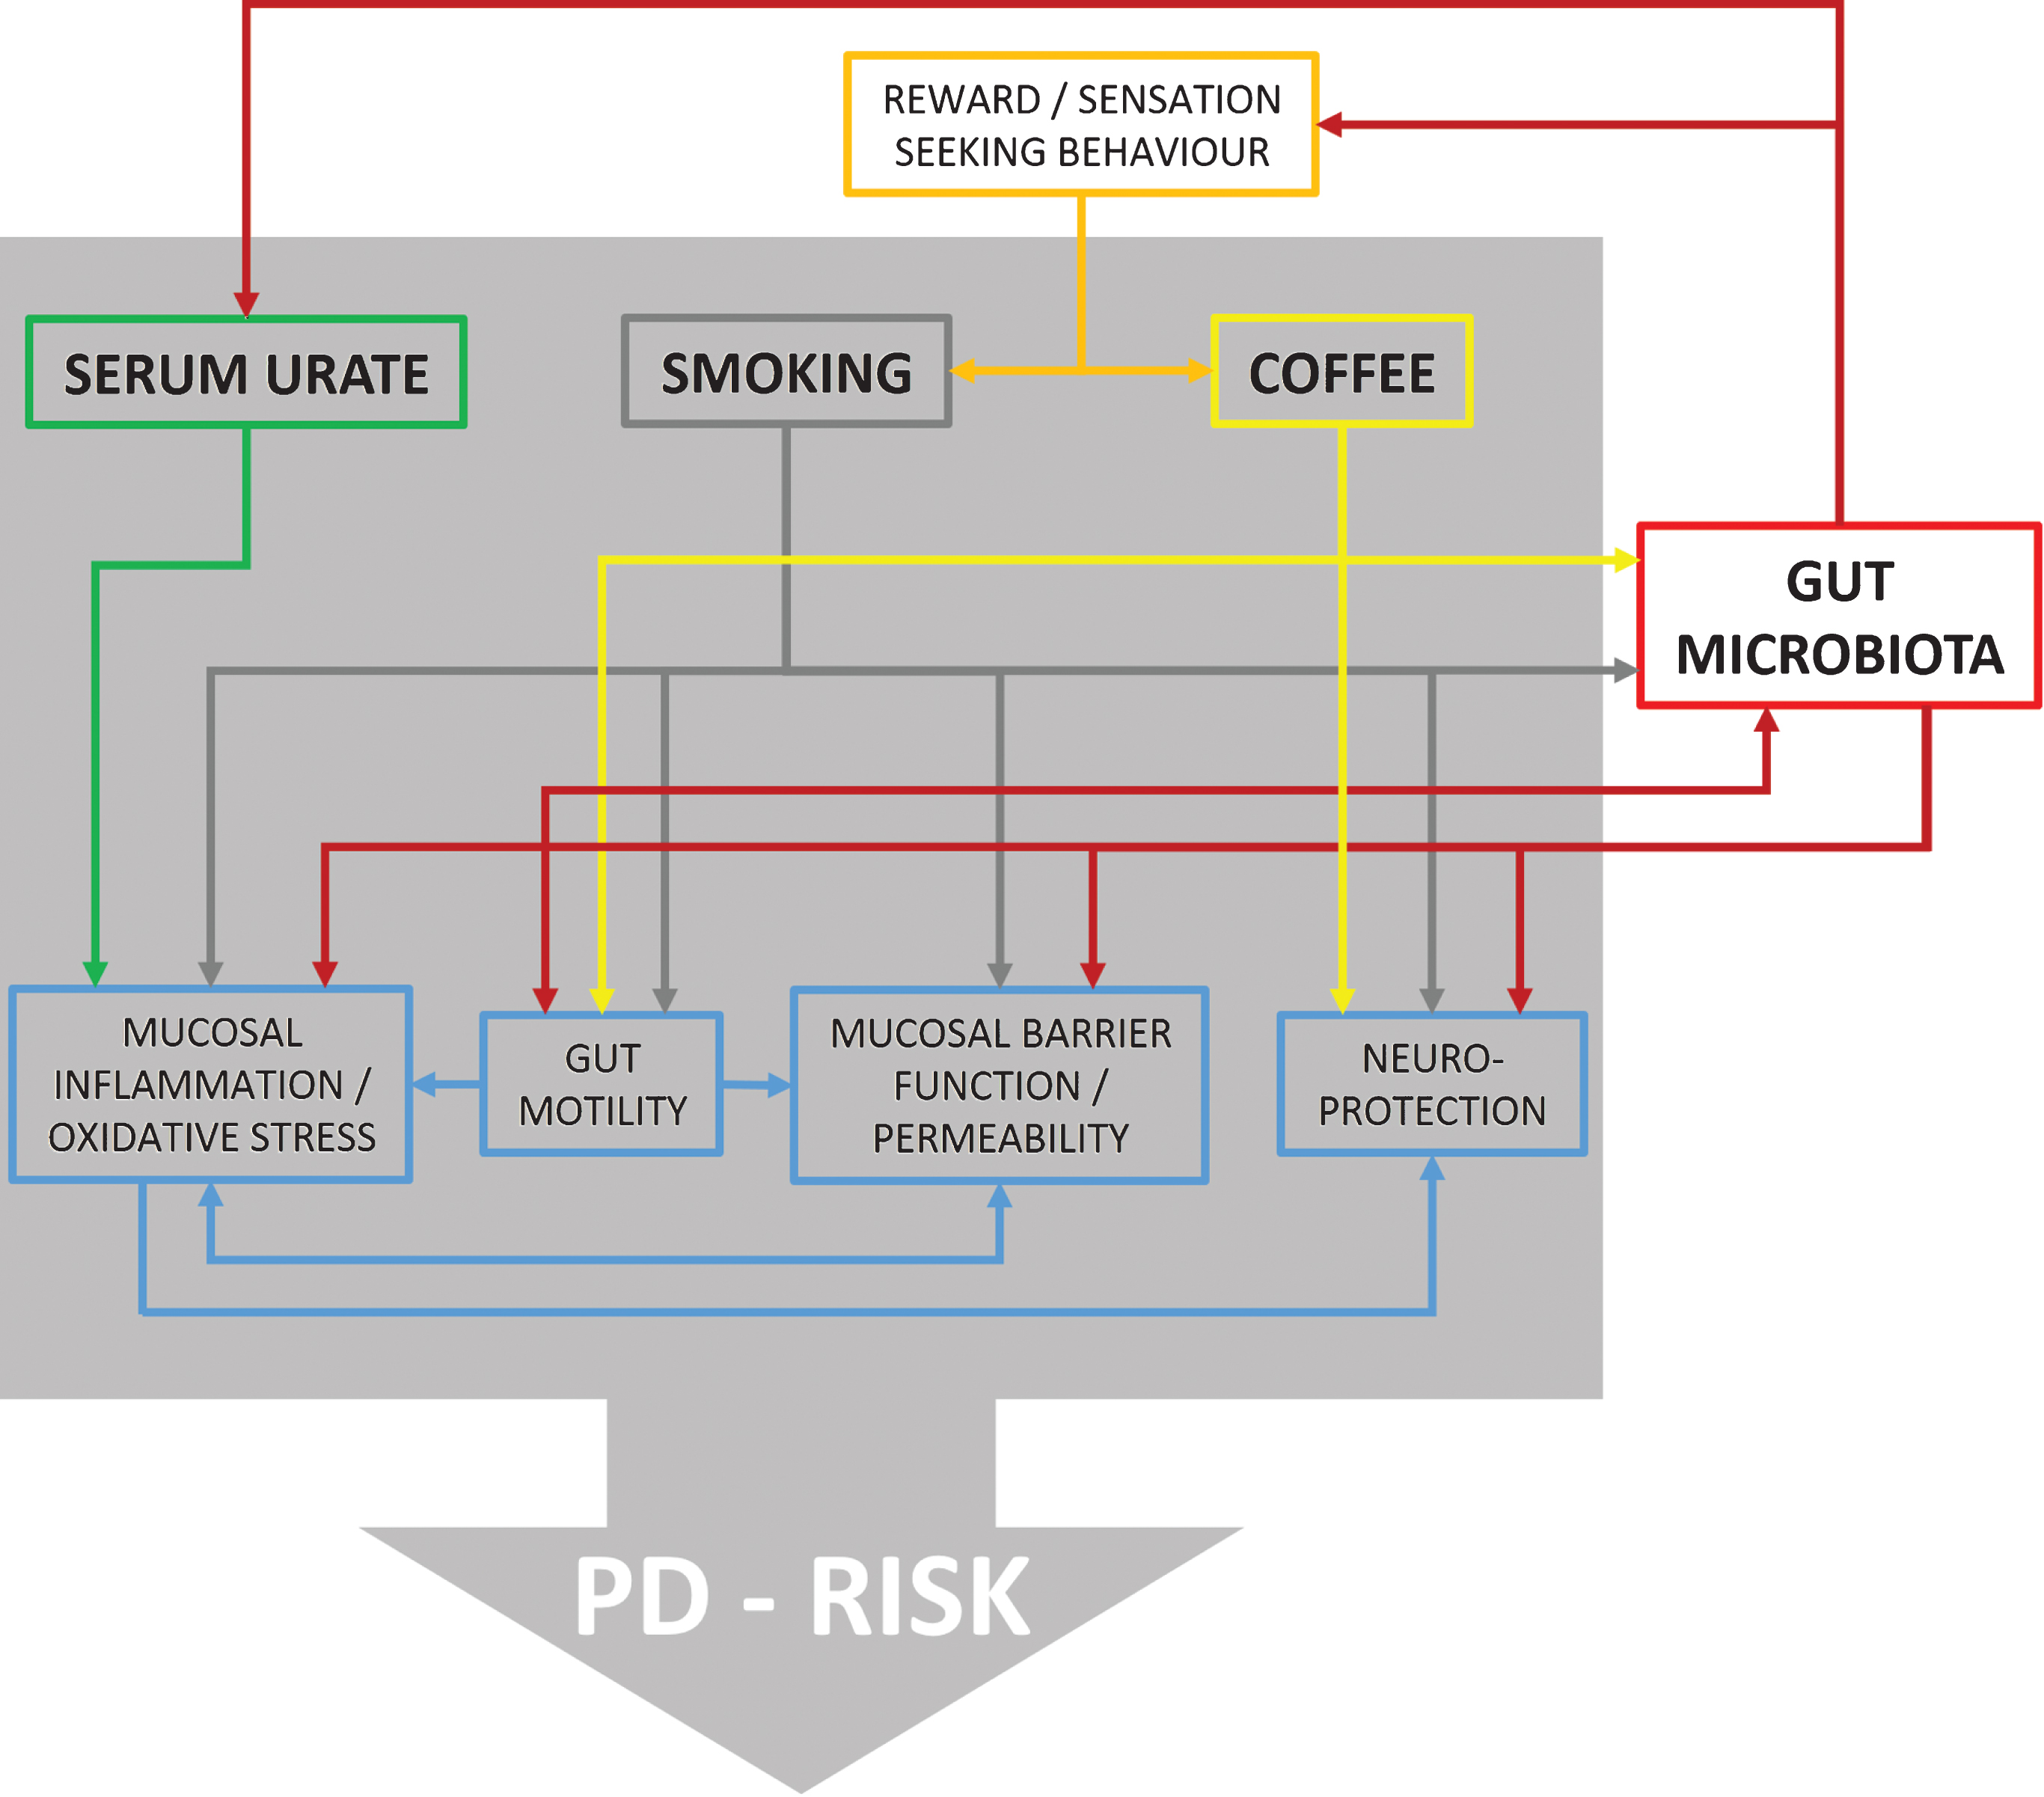 Flow chart illustrating reported effects between urate, smoking, coffee, and different physiological domains with possible relevance for PD risk. Furthermore, it is shown which of these factors are also related to changes in gut microbiota providing ground for interactions. However, at present direct evidence for such interactions is missing and information is derived from in vitro as well as in vivo studies on humans and animal models.